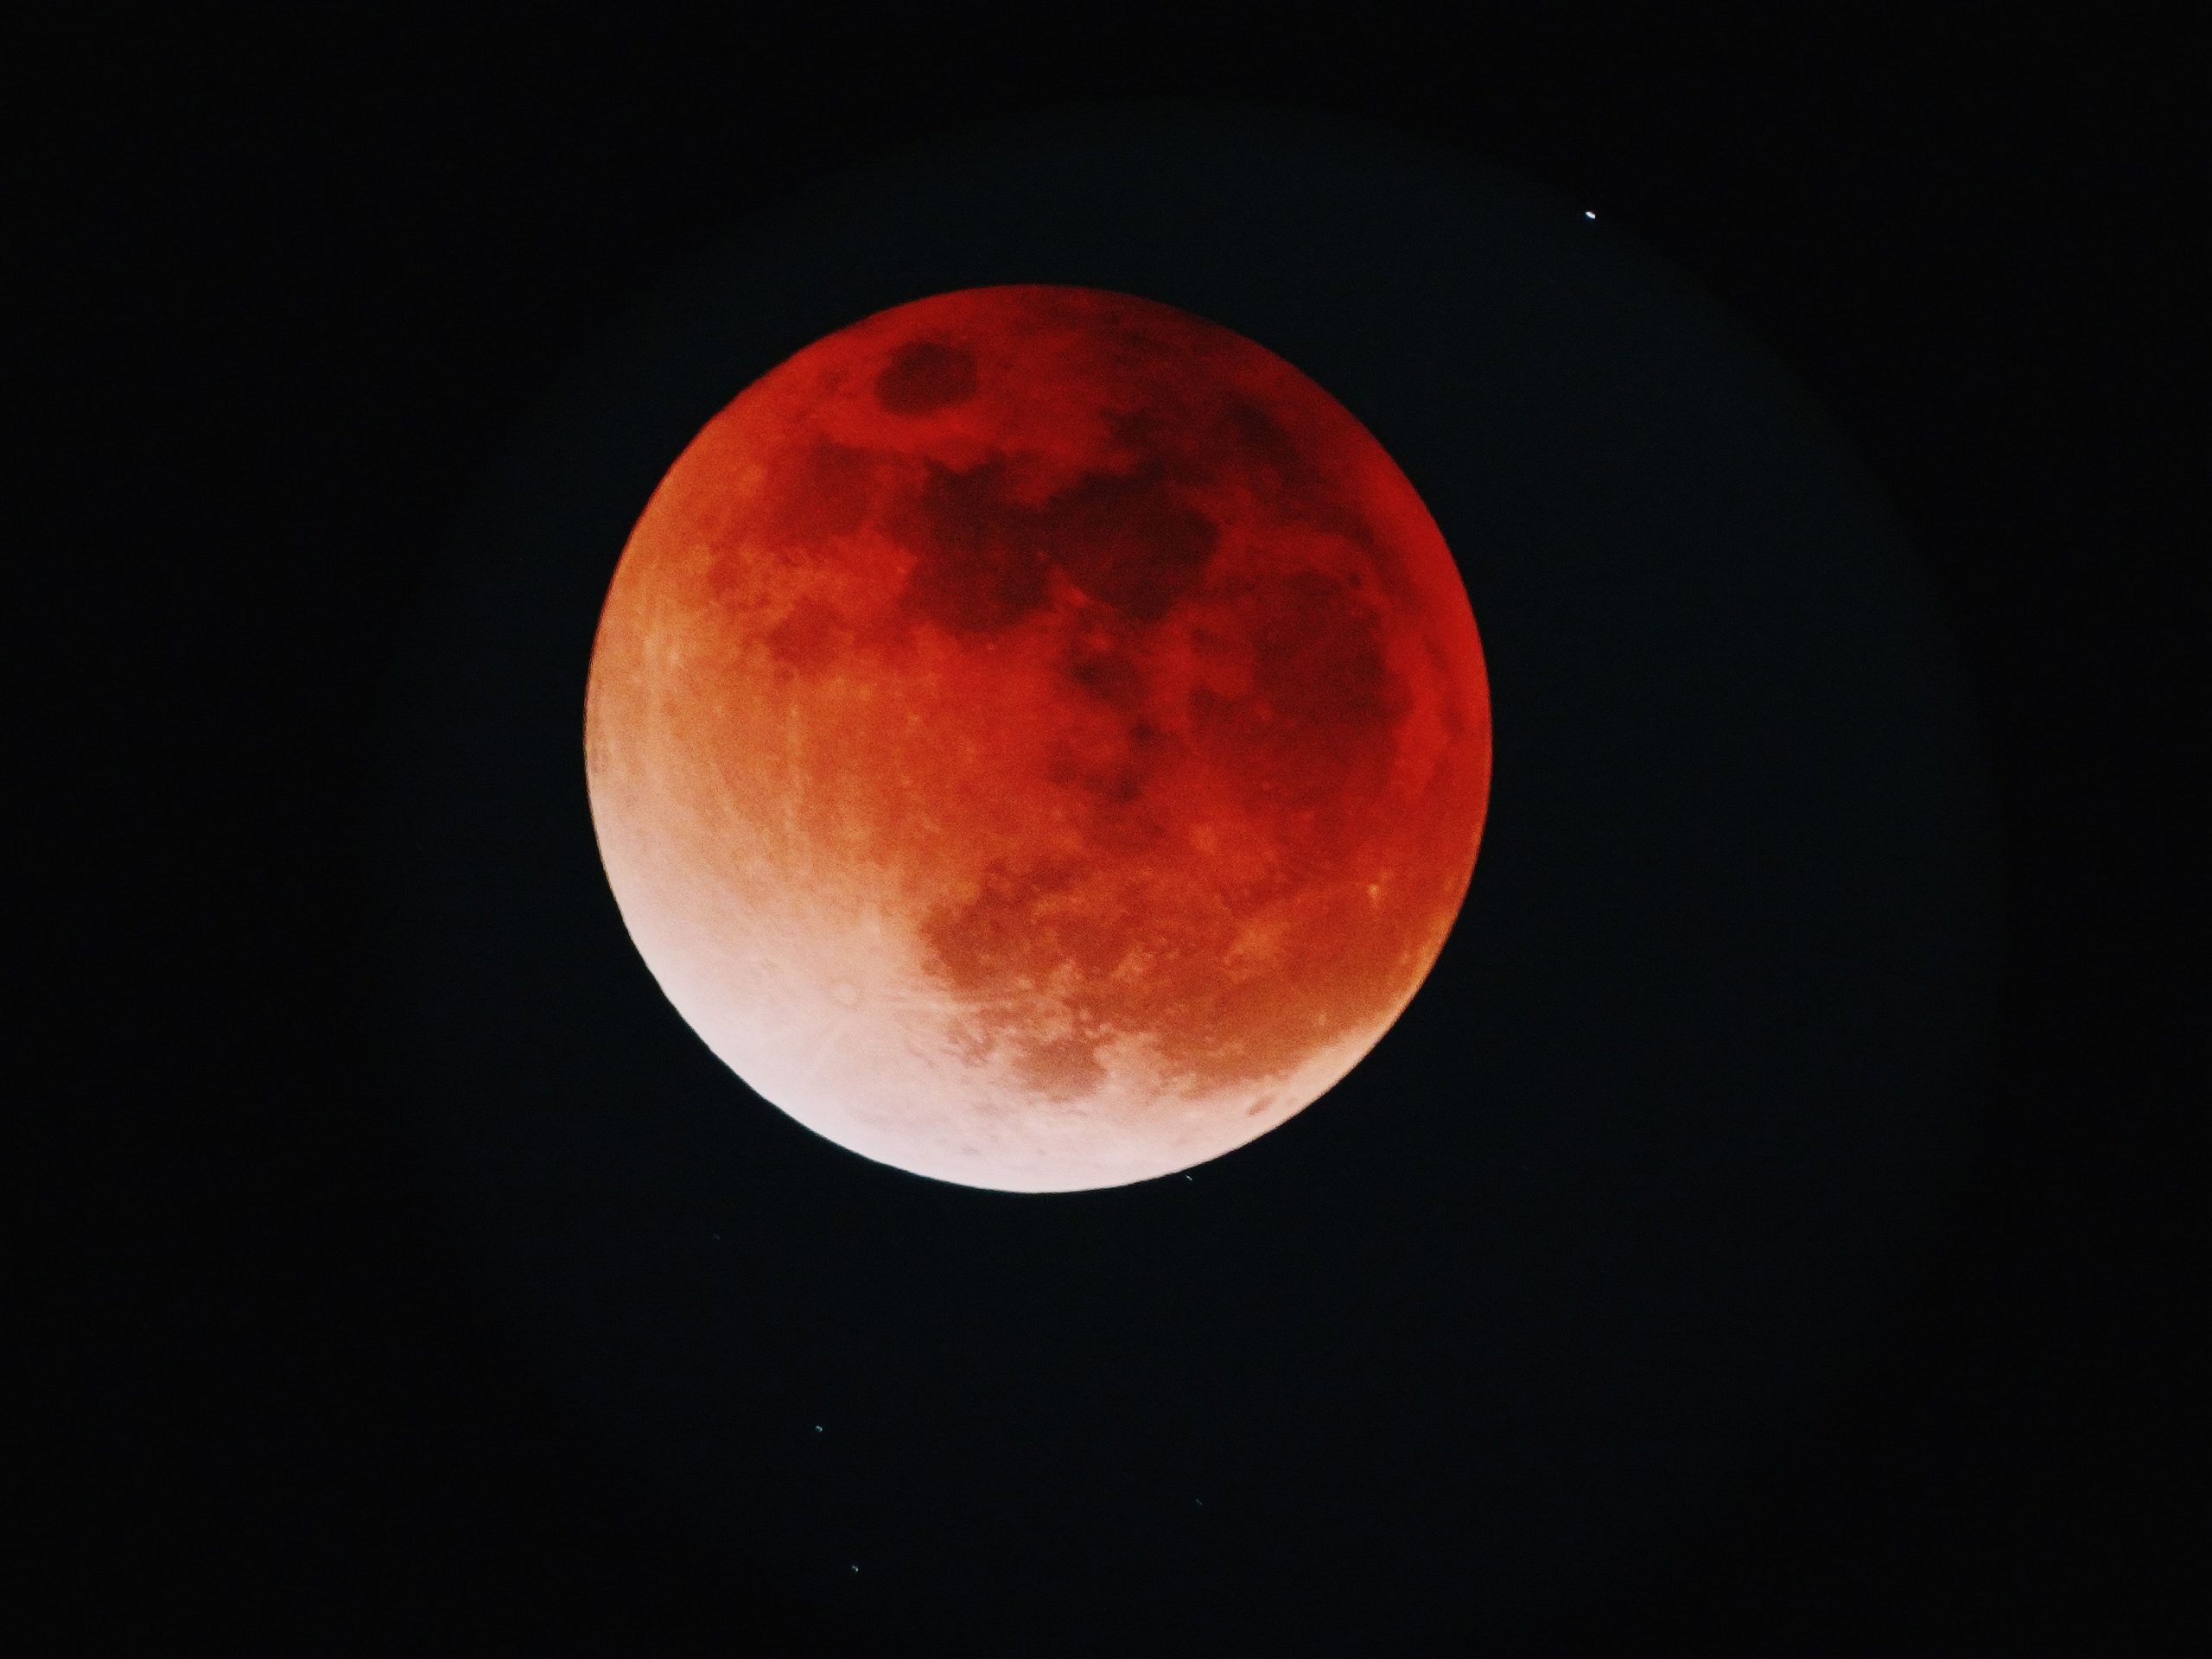 Longest partial lunar eclipse in 580 years, will be seen again in 2669